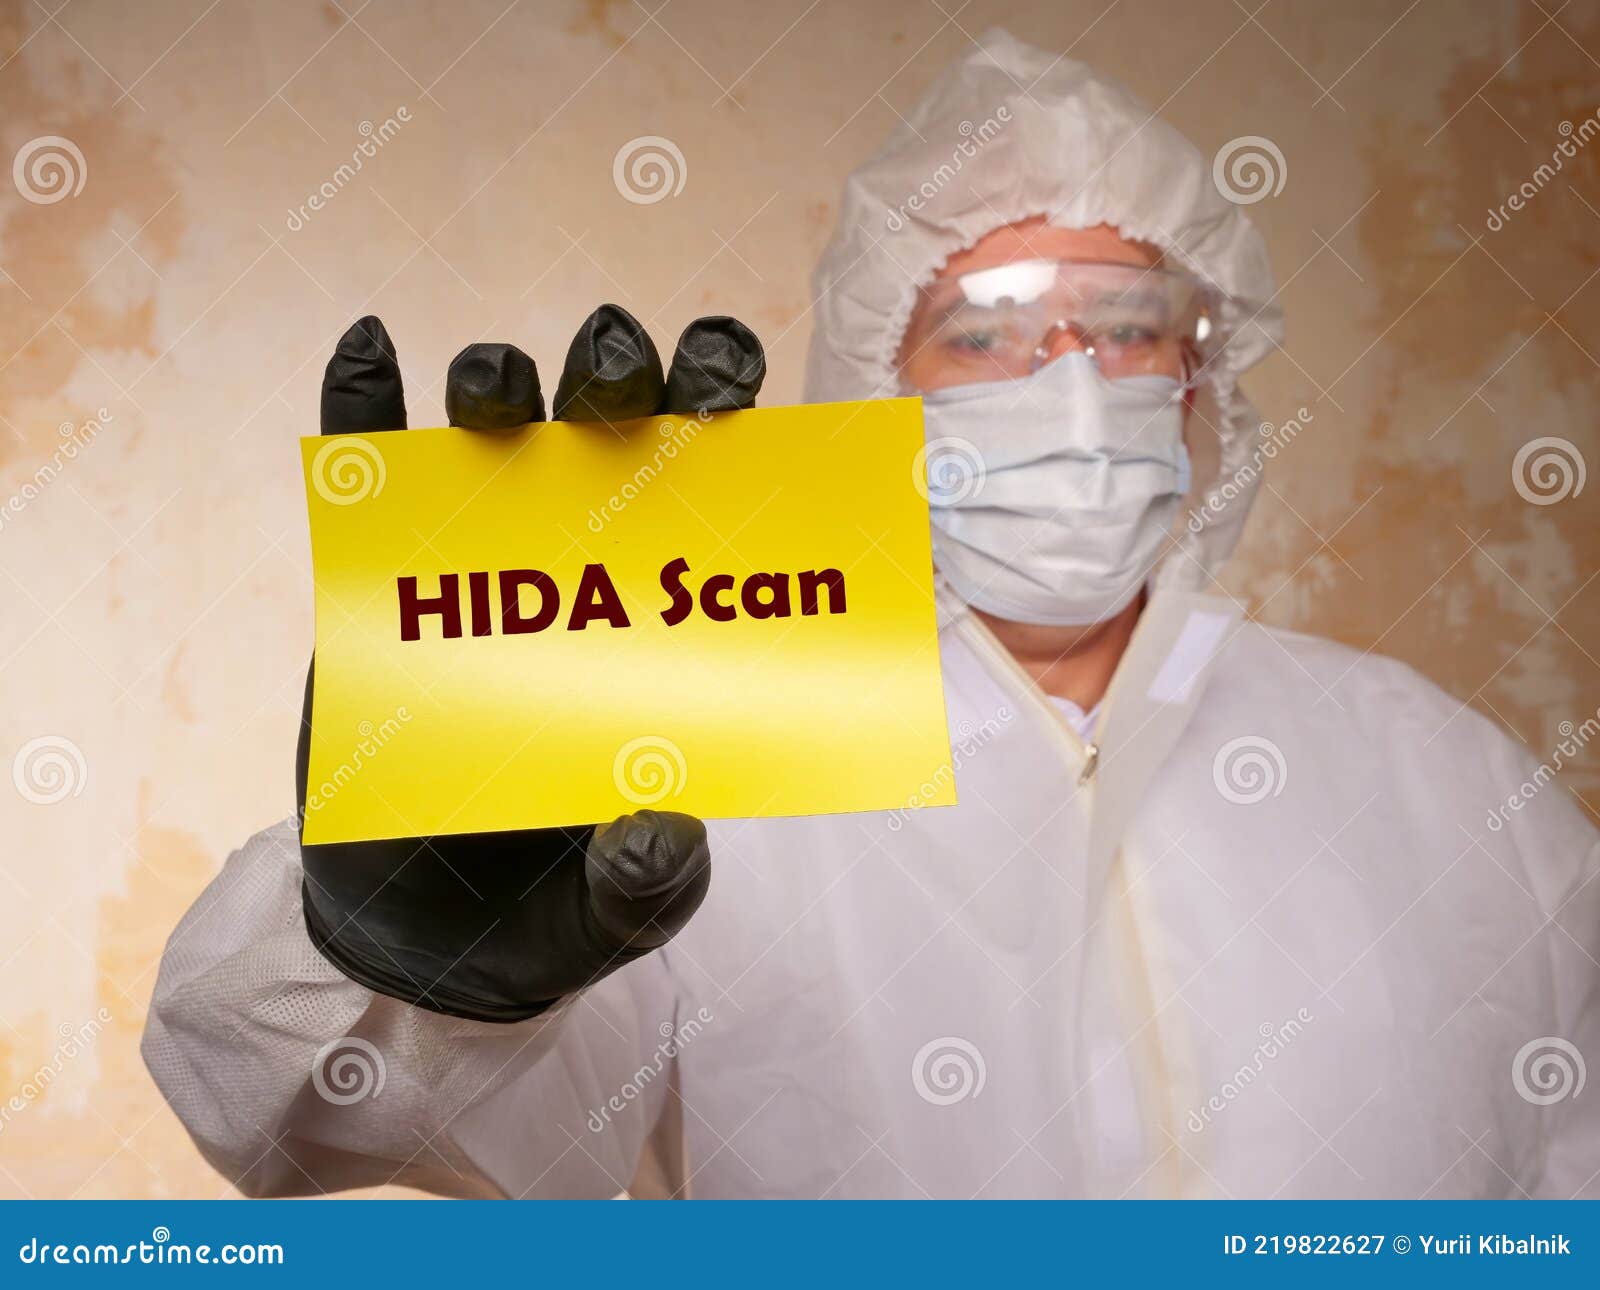 HEPATOBILIARY SCAN Phrase On The Screen Stock Photography ...